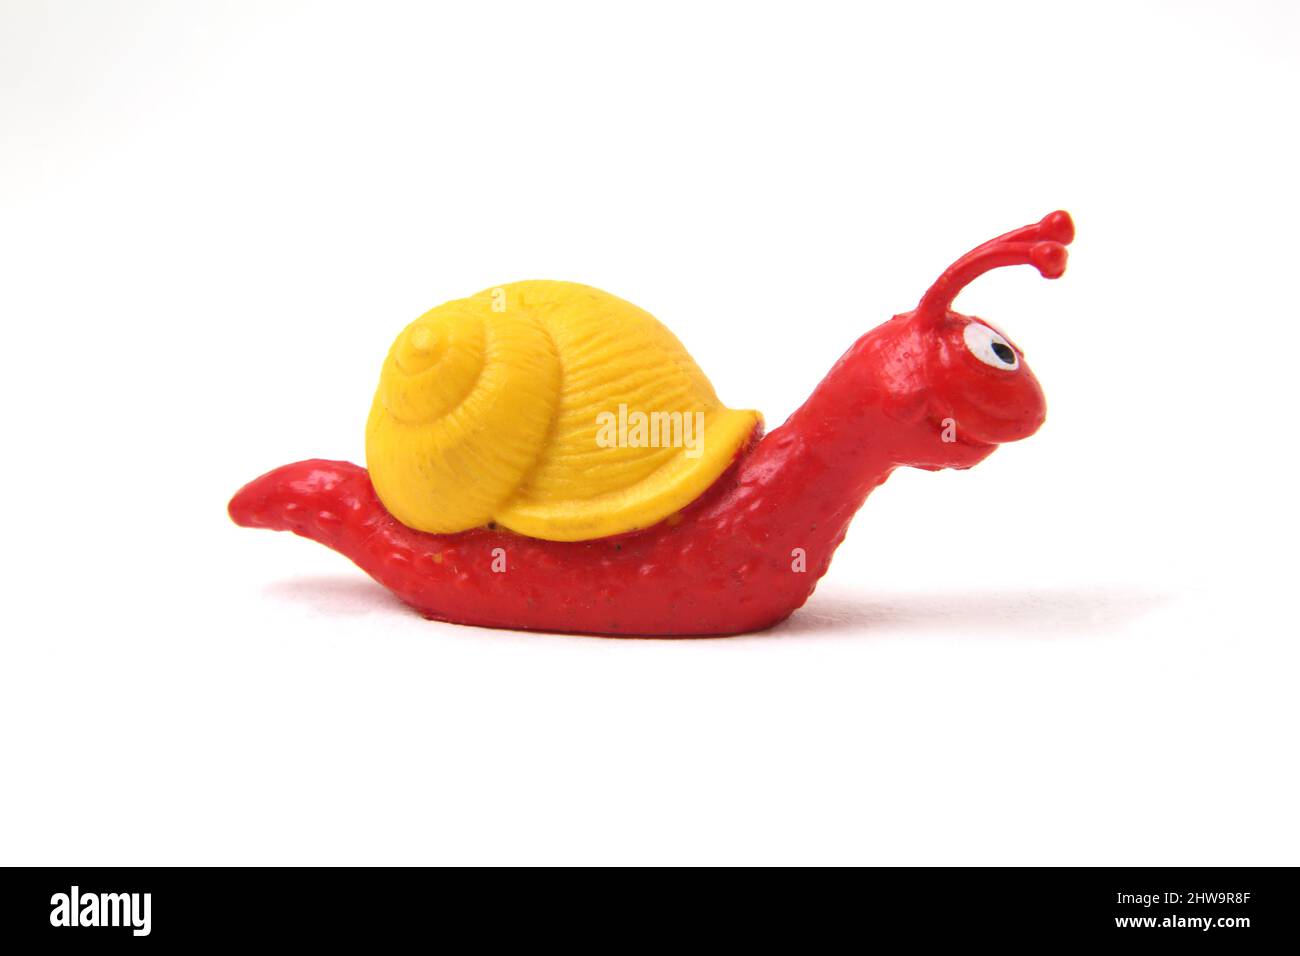 Vintage 1980's Schleich Red And Yellow Plastic toy Snail N.O4 Stock Photo